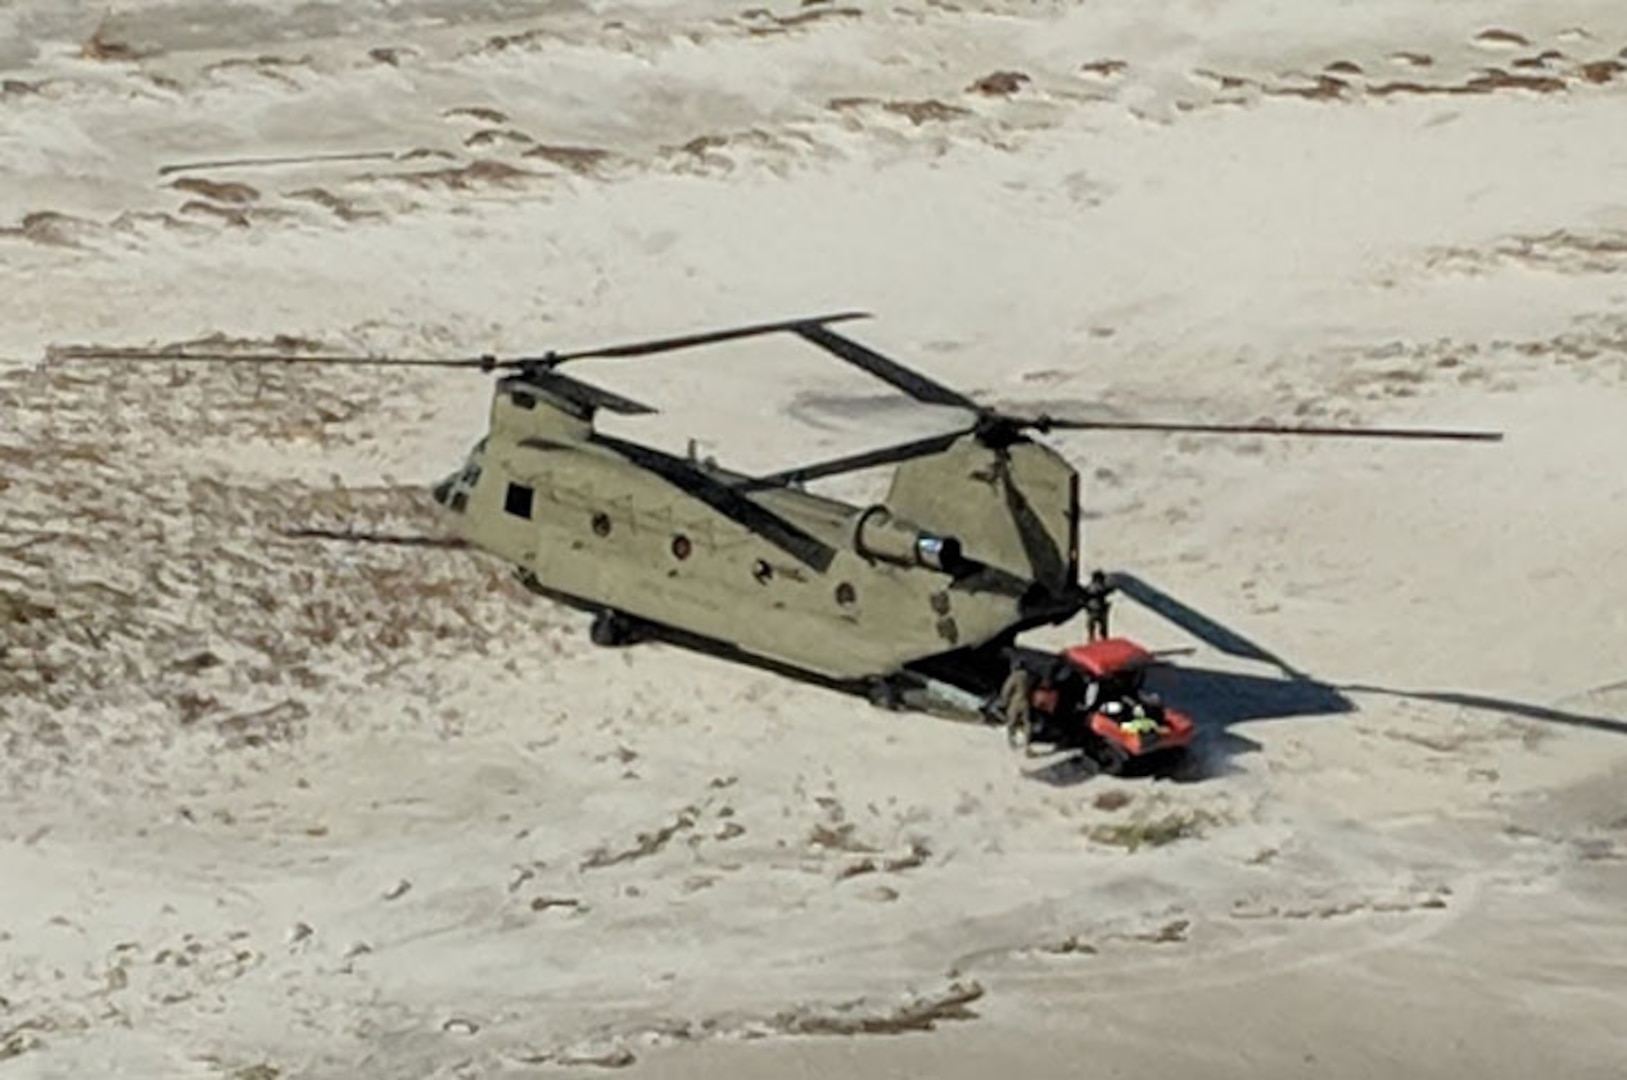 A New York Army National Guard CH-47 Chinook helicopter transports search and rescue personnel and their all-terrain vehicles to St. Teresa, along the shoreline of the Florida panhandle, Oct. 12, 2018. The New York Army National Guard Soldiers deployed two Chinooks and two UH-60 Black Hawk helicopters along with 25 crew members to Tallahassee, Florida, to assist with response and recovery efforts for the Florida National Guard following the impact of Hurricane Michael.